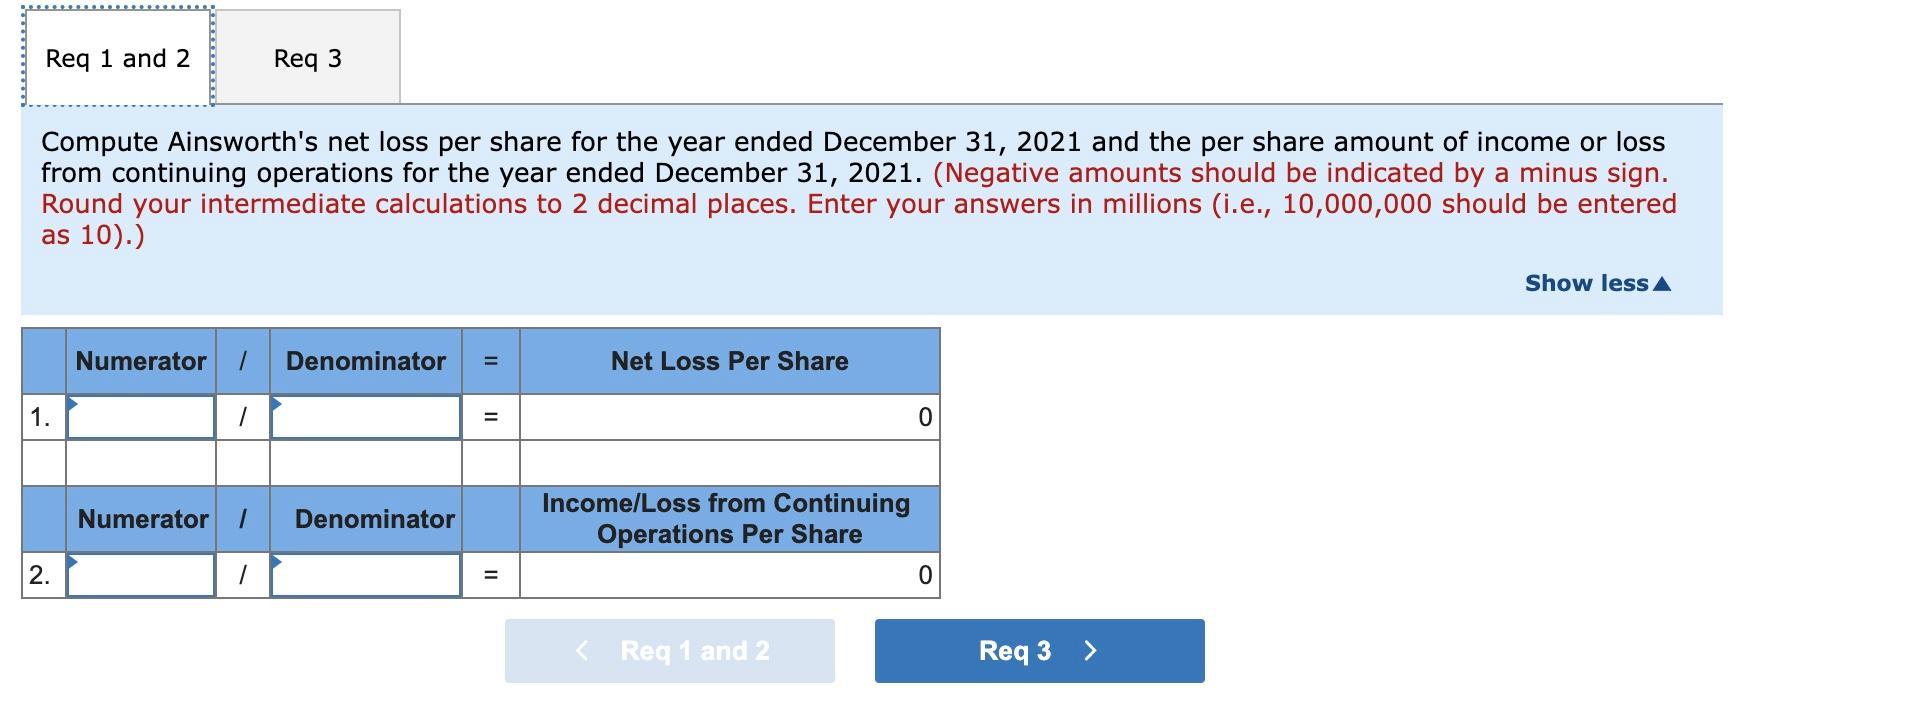 Compute Ainsworths net loss per share for the year ended December 31,2021 and the per share amount of income or loss from co